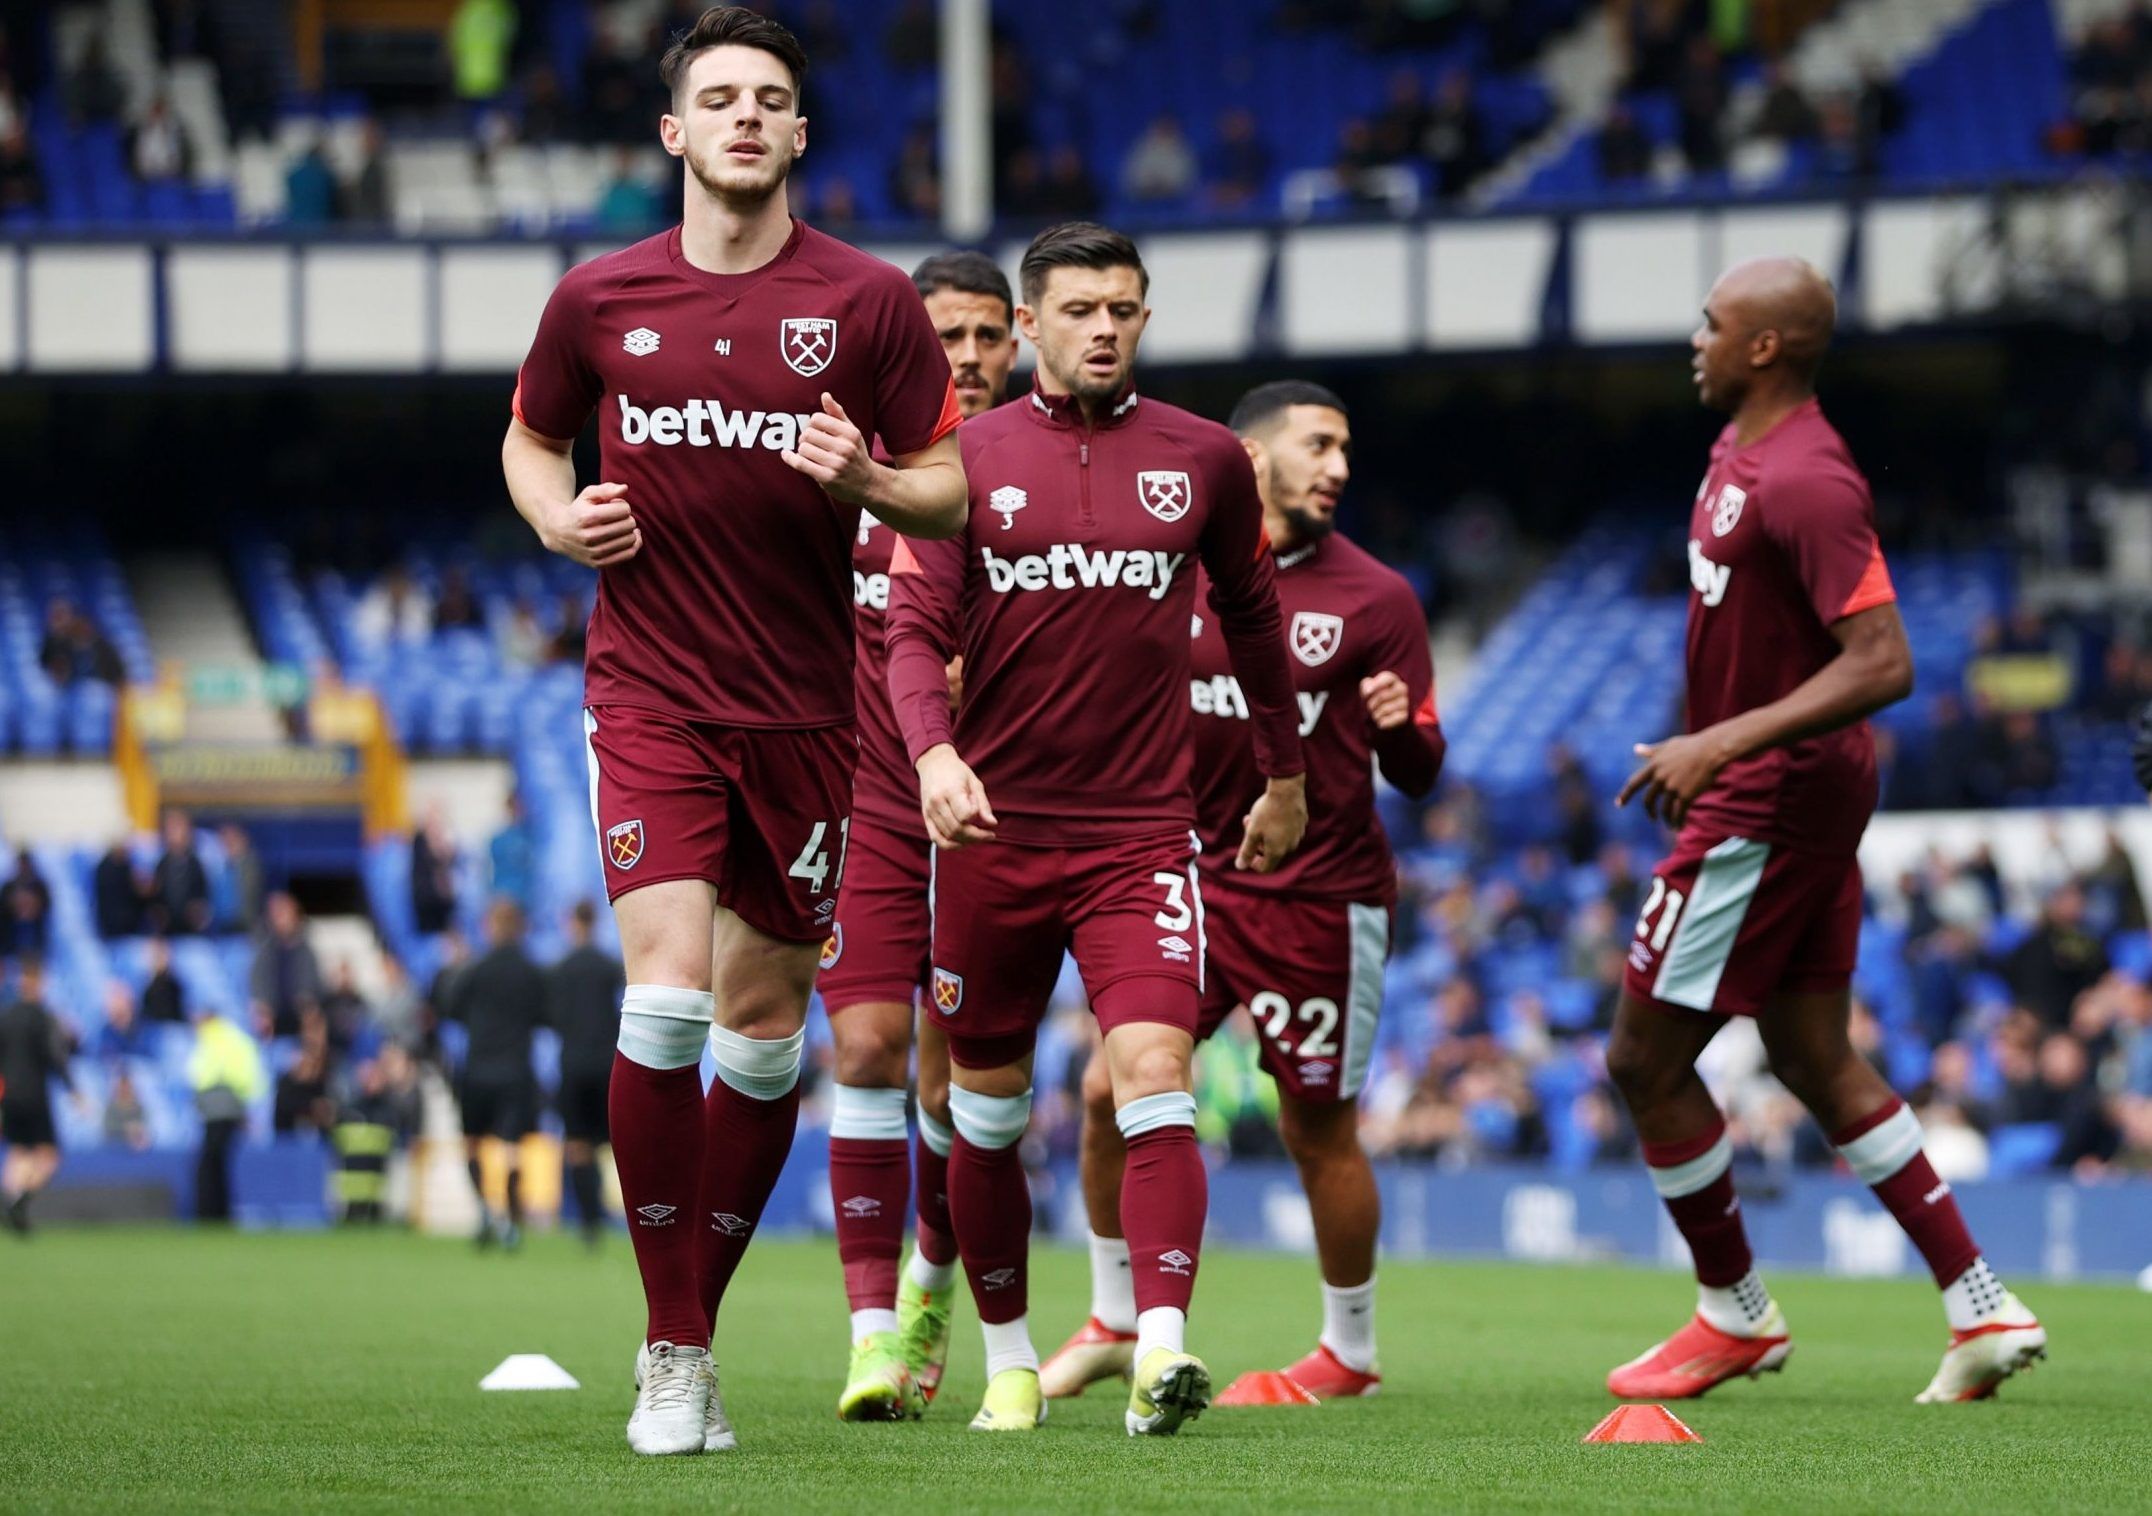 West Ham stars Declan Rice and Aaron Cresswell warm up before their Premier League clash against Everton at Goodison Park